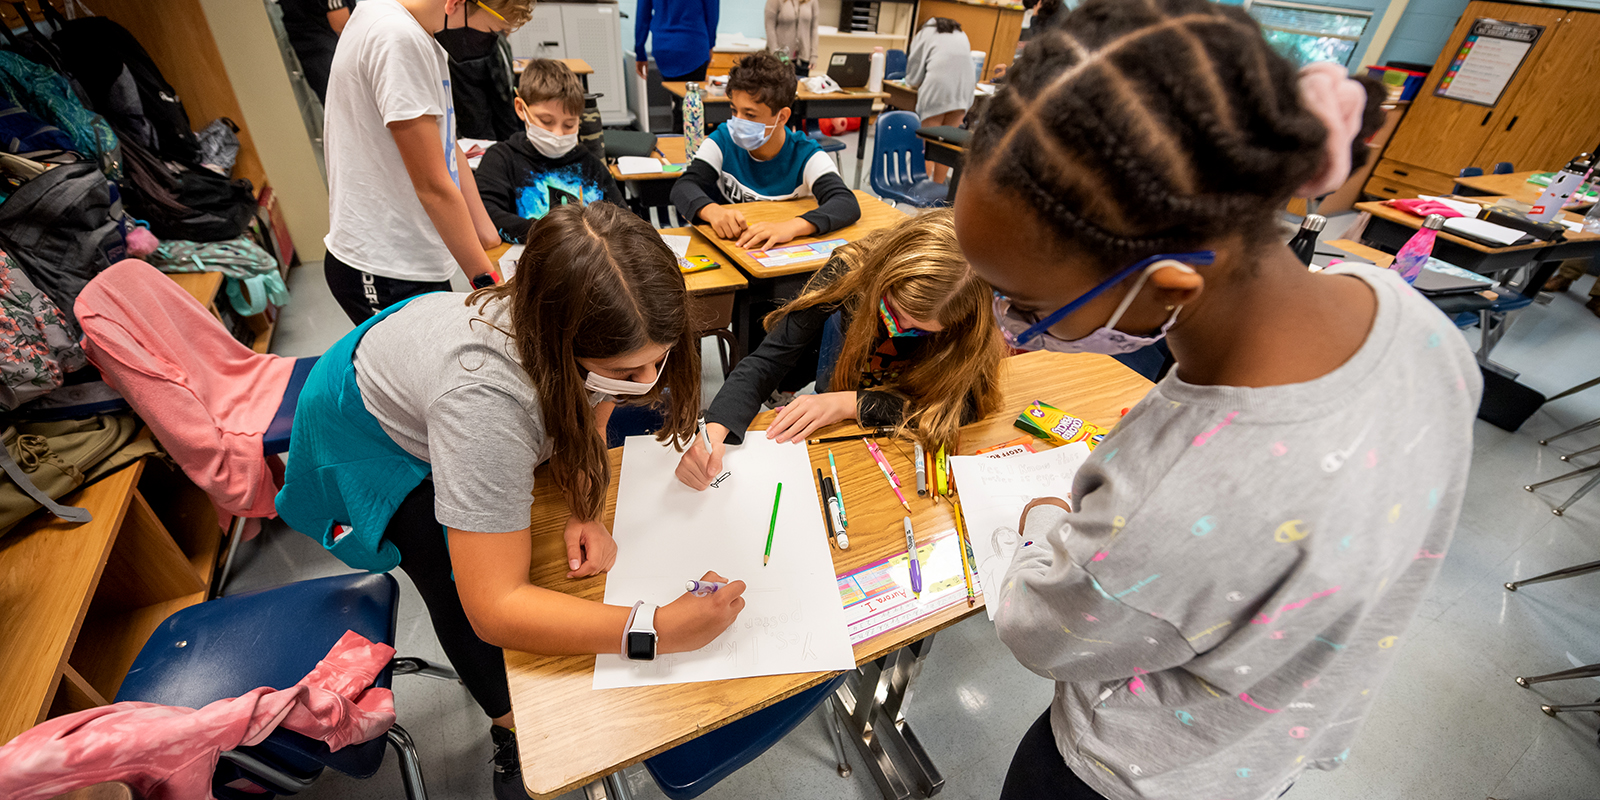 Sixth-graders at Franklin Sherman Elementary work on posters to promote safe habits during the Covid-19 pandemic.